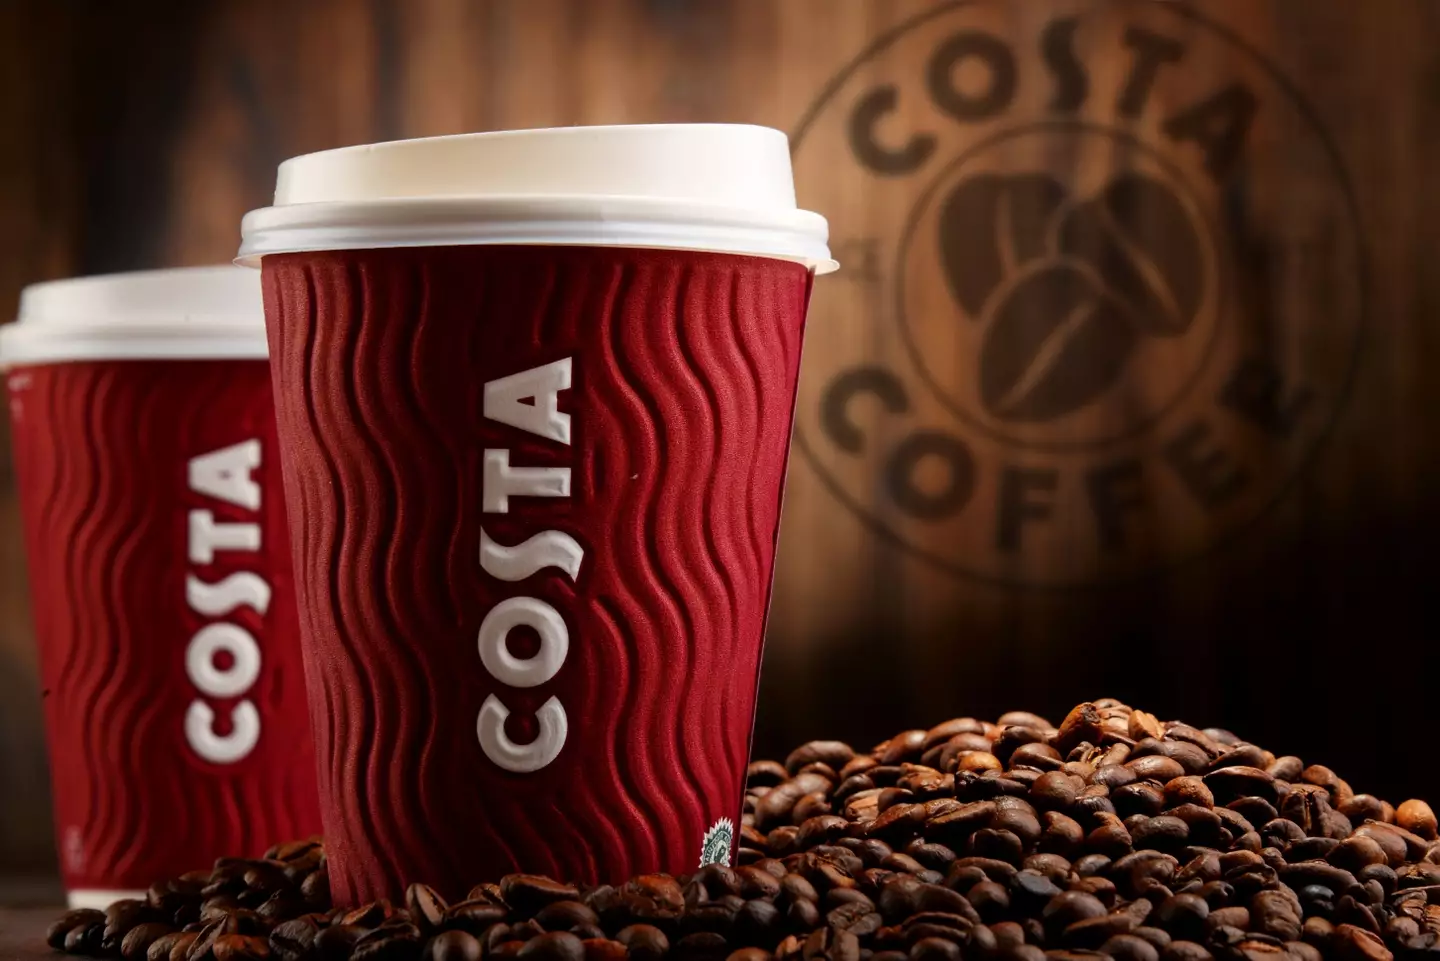 Previously, Costa customers could purchase food and drink using their points balance (